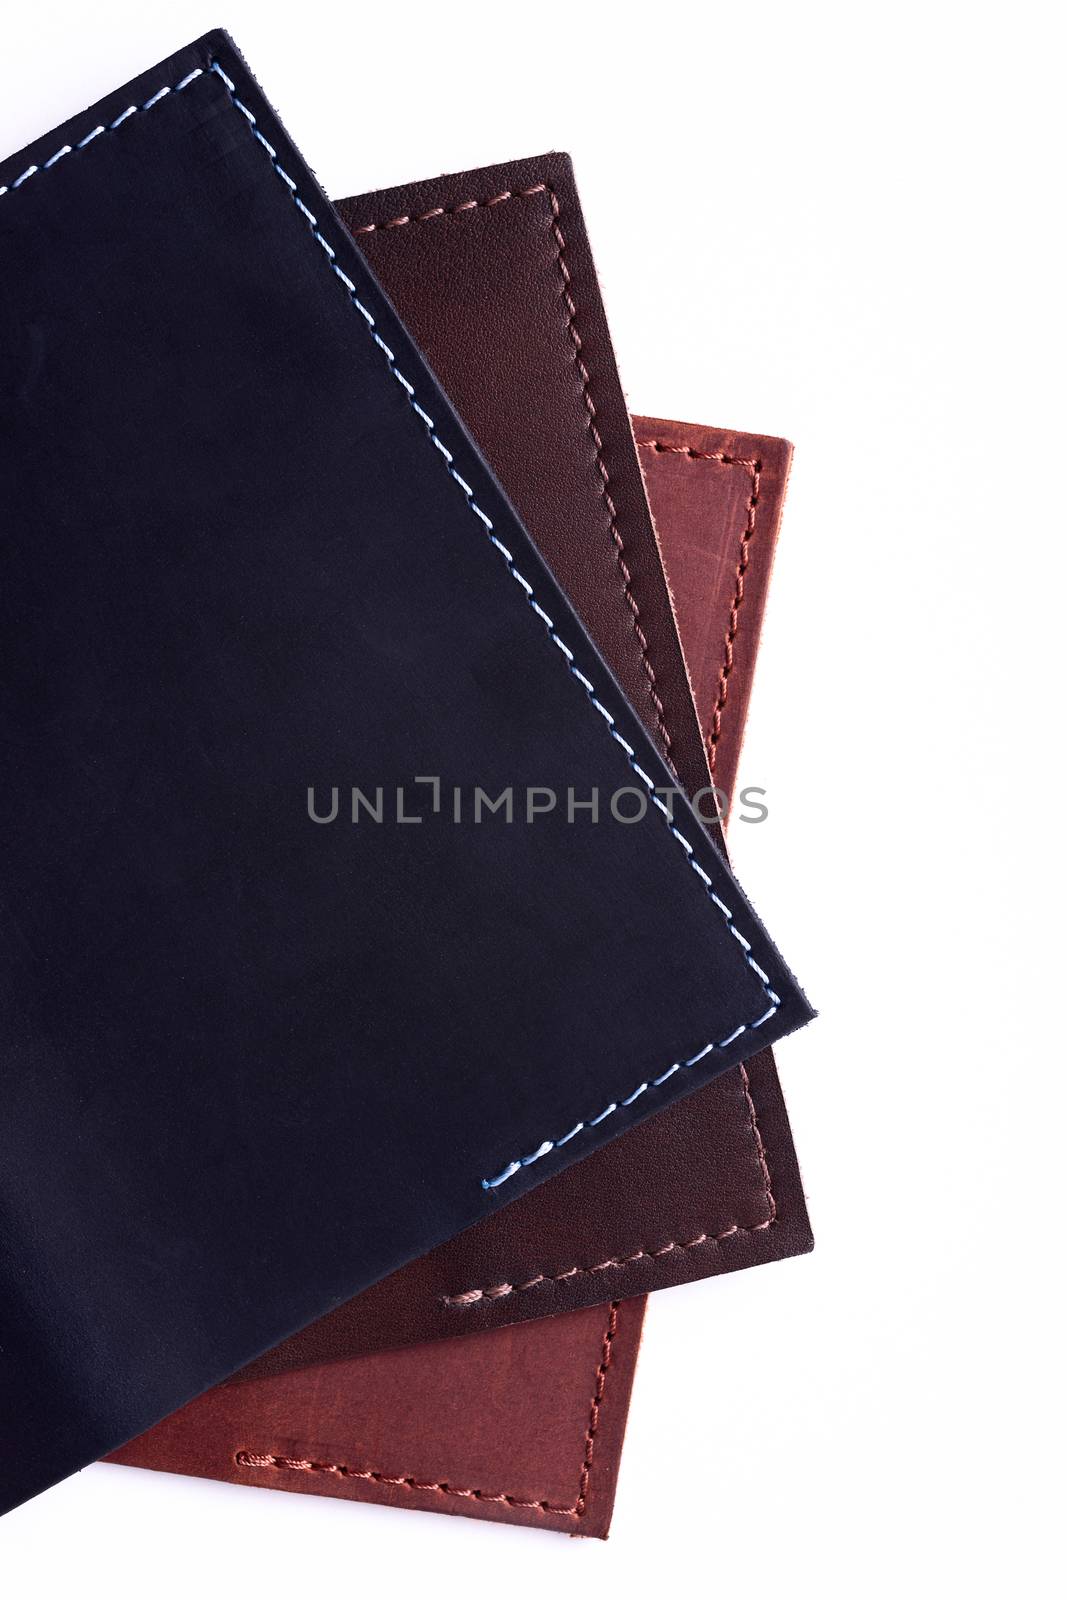 A parts of three handmade leather passport covers isolated on white background. Closeup view. Covers are dark blue, red and brown.